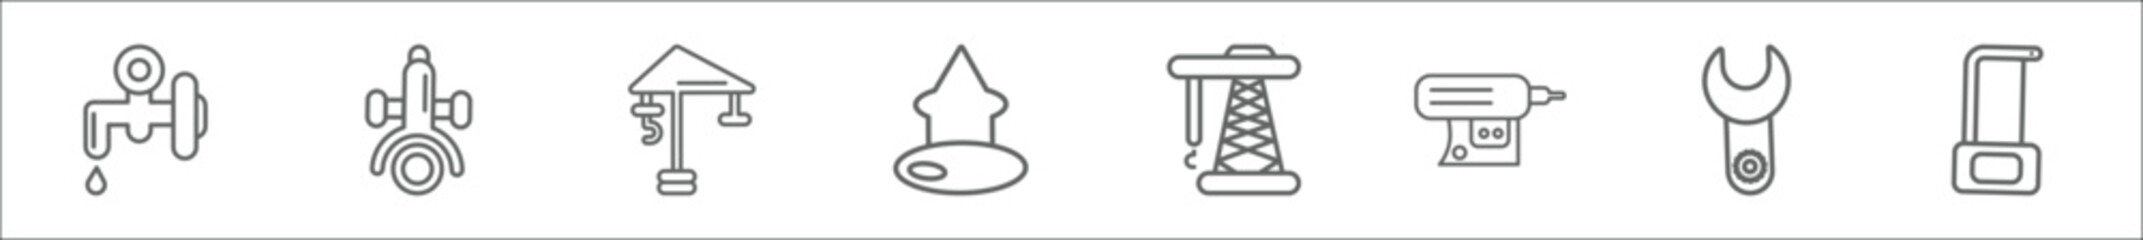 outline set of construction line icons. linear vector icons such as stopcock, angle grinder, progress, inclined, derrick facing right, nail gun, spanner, hacksaw